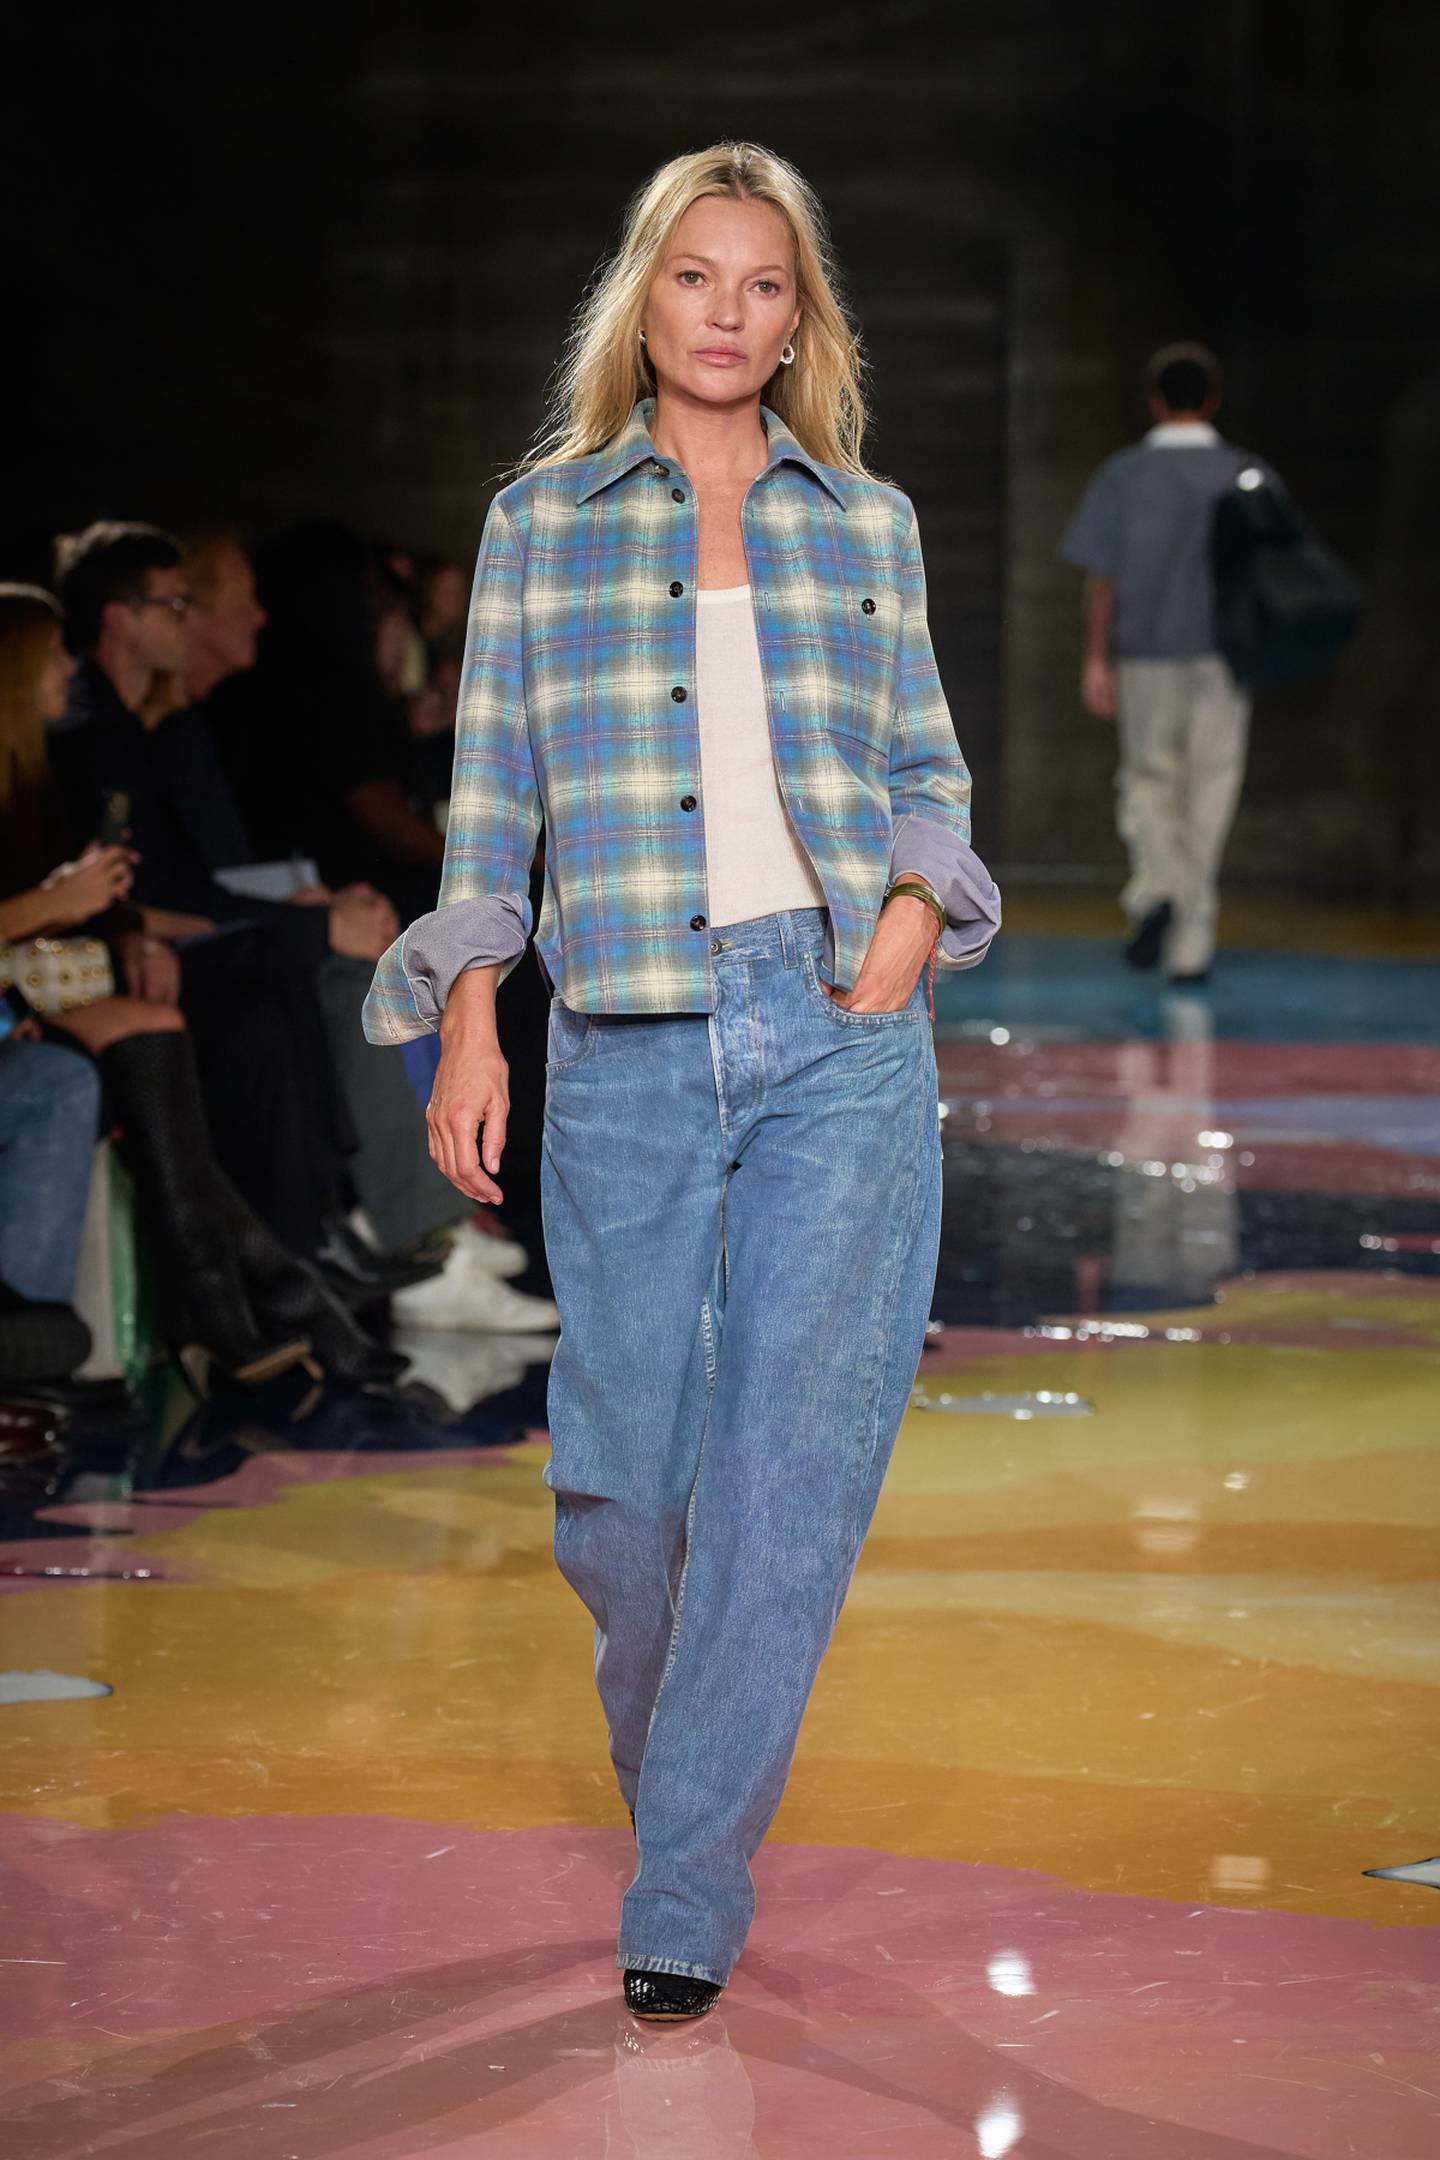 Kate Moss walks the runway wearing jeans and a blue plaid shirt over a white T-shirt, all made of leather, on the runway.